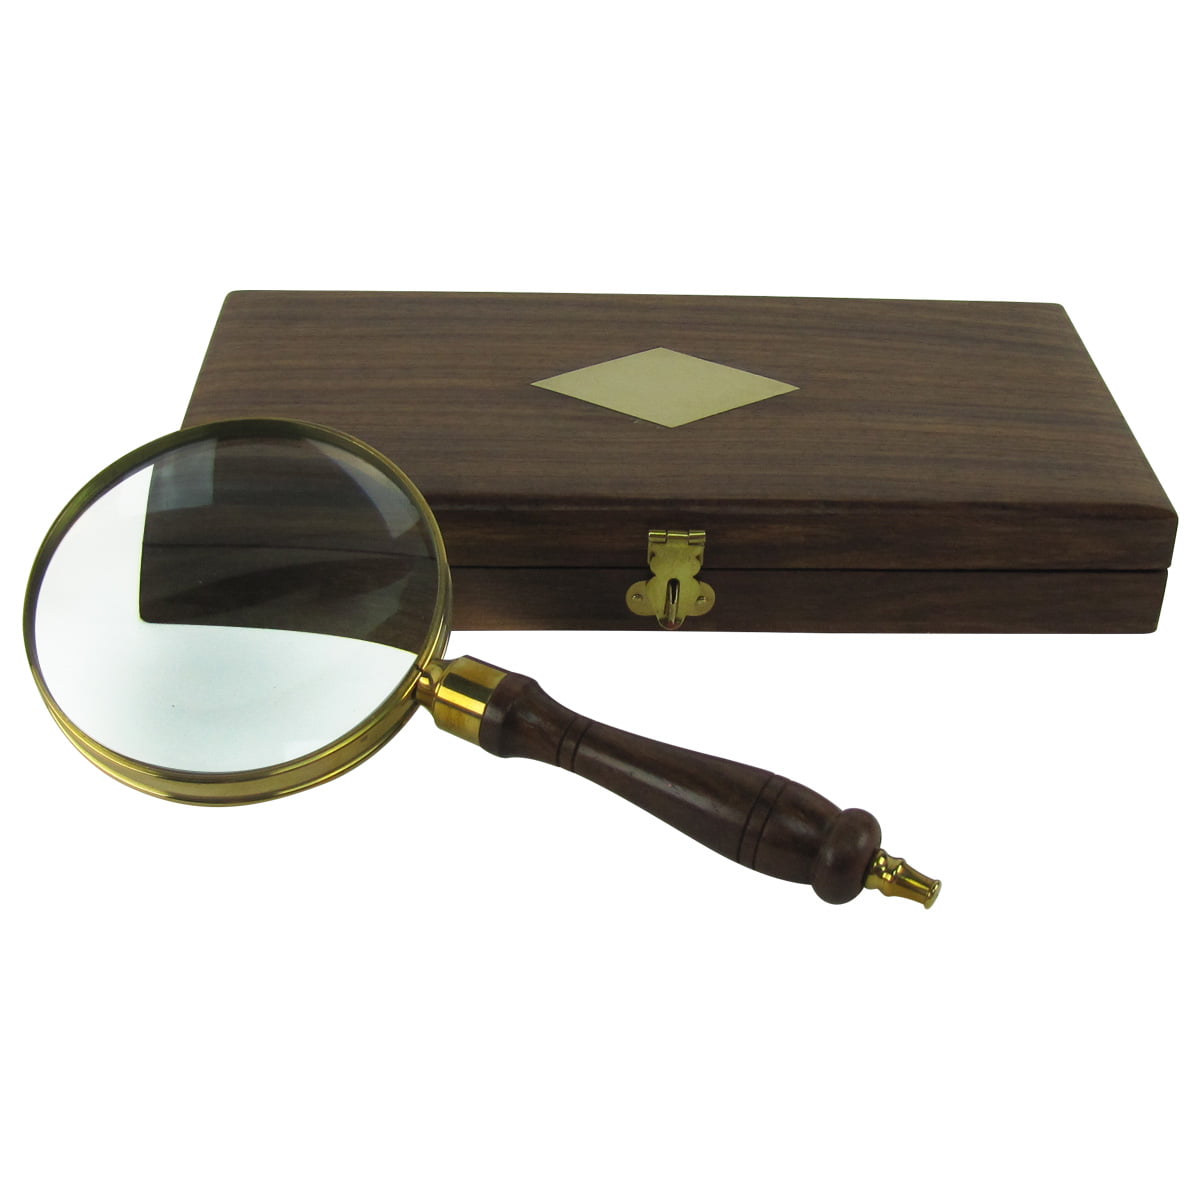 Details about   vintagean_27 Brass Magnifying Glass with Wooden Base Table Top Item 